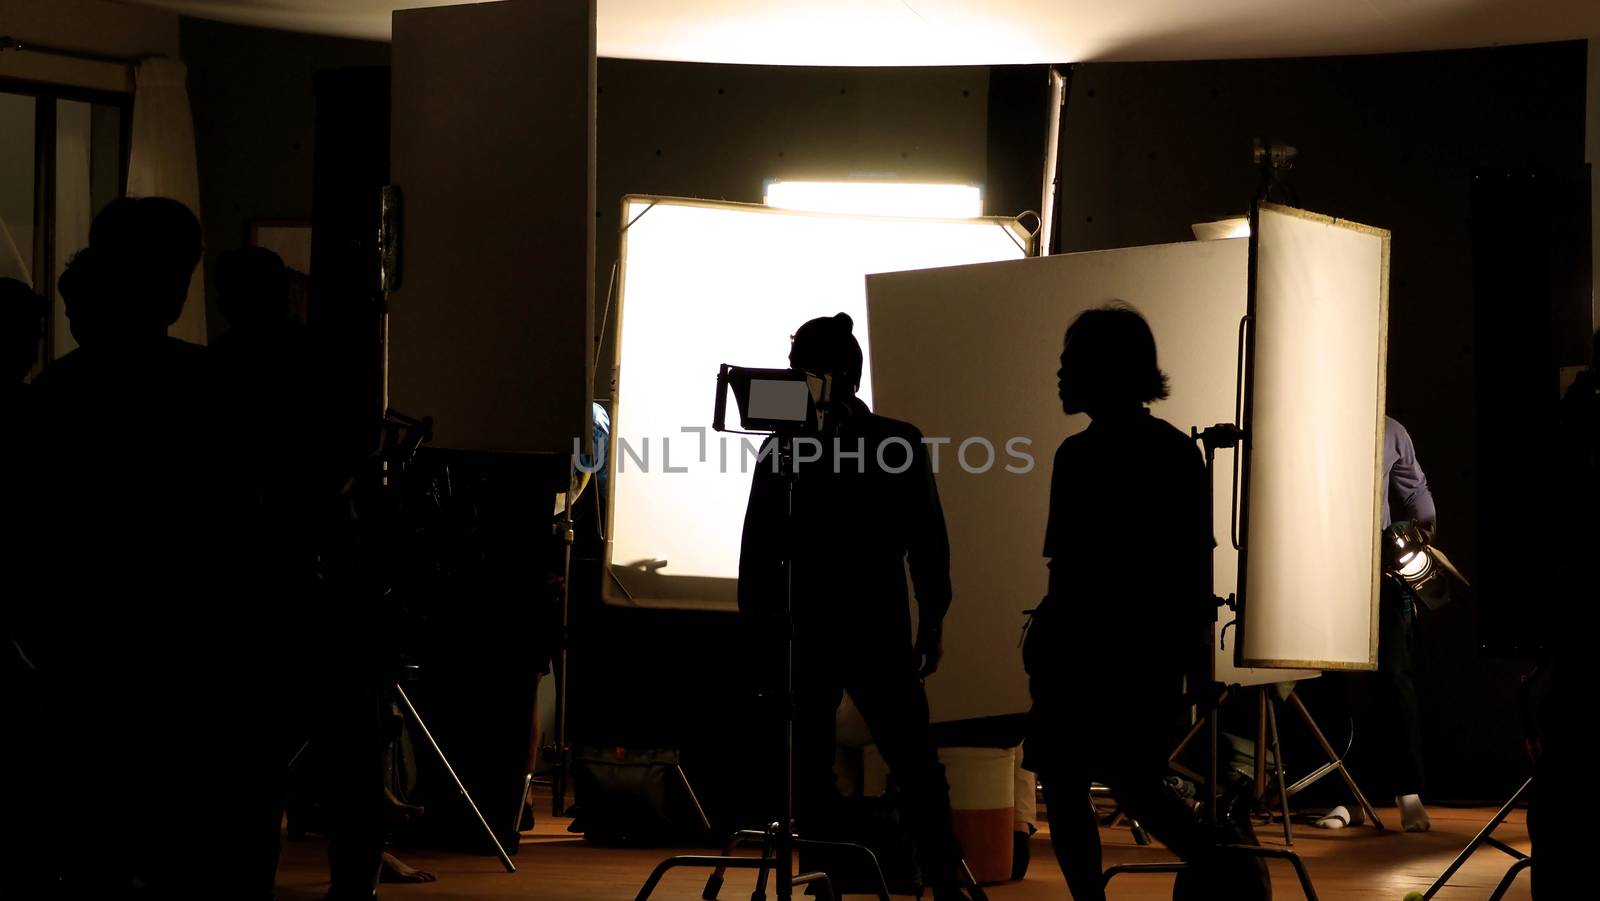 Shooting studio behind the scenes in silhouette images by gnepphoto